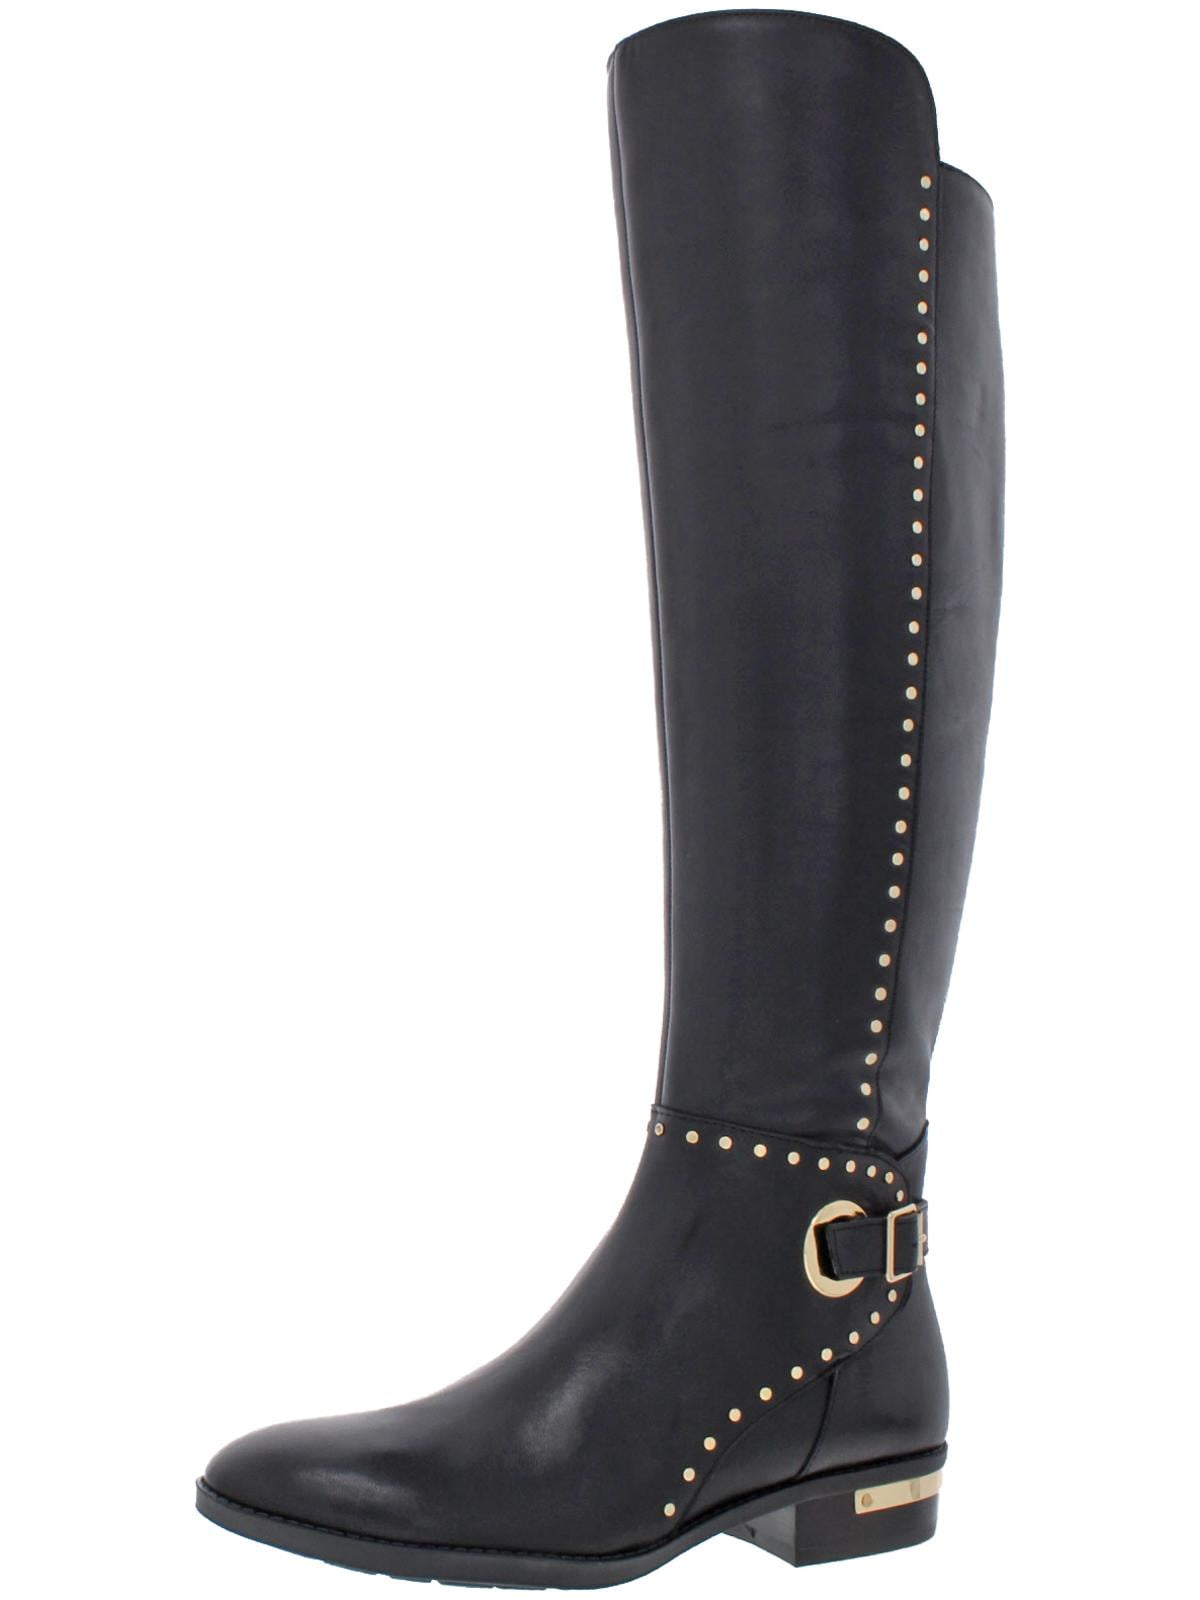 Vince Camuto Riding Boots - www.inf-inet.com